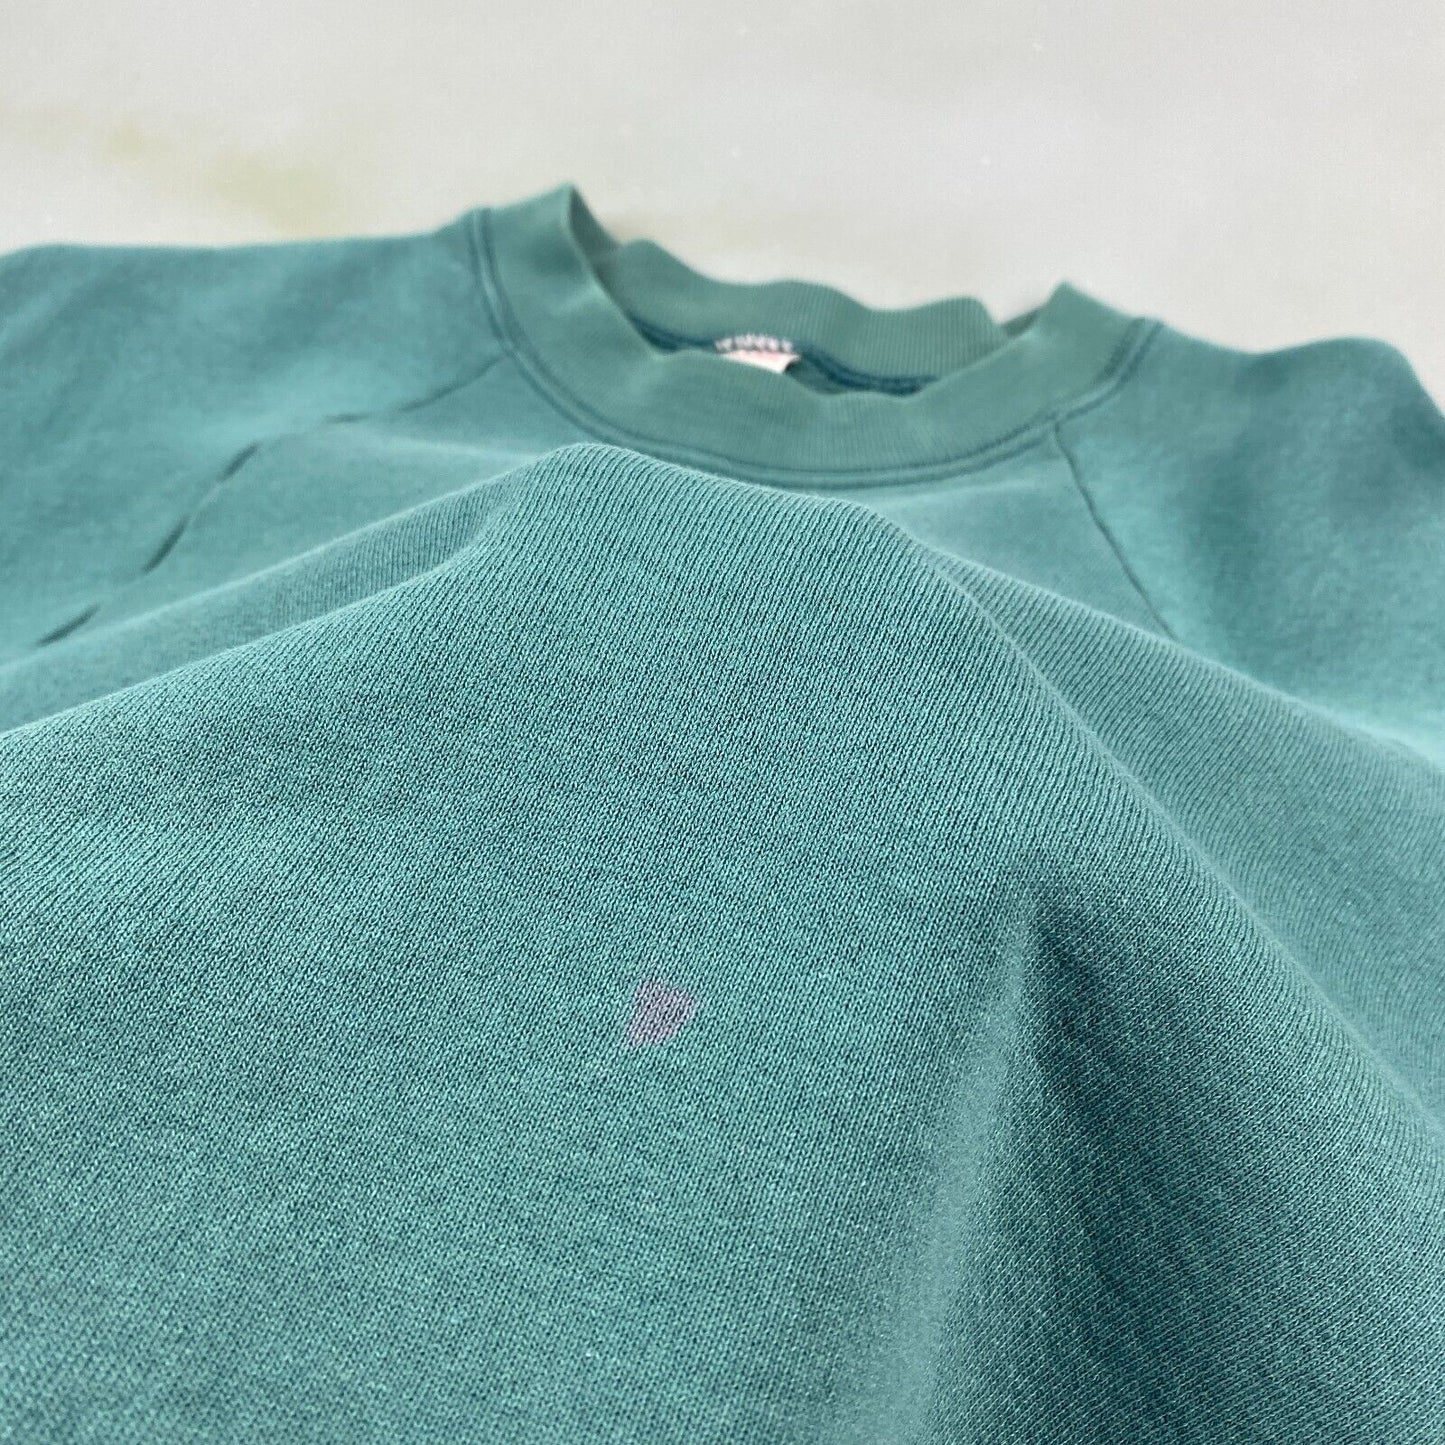 VINTAGE 90s Fruit Of The Loom Blank Green Crewneck Sweater sz Large Womens